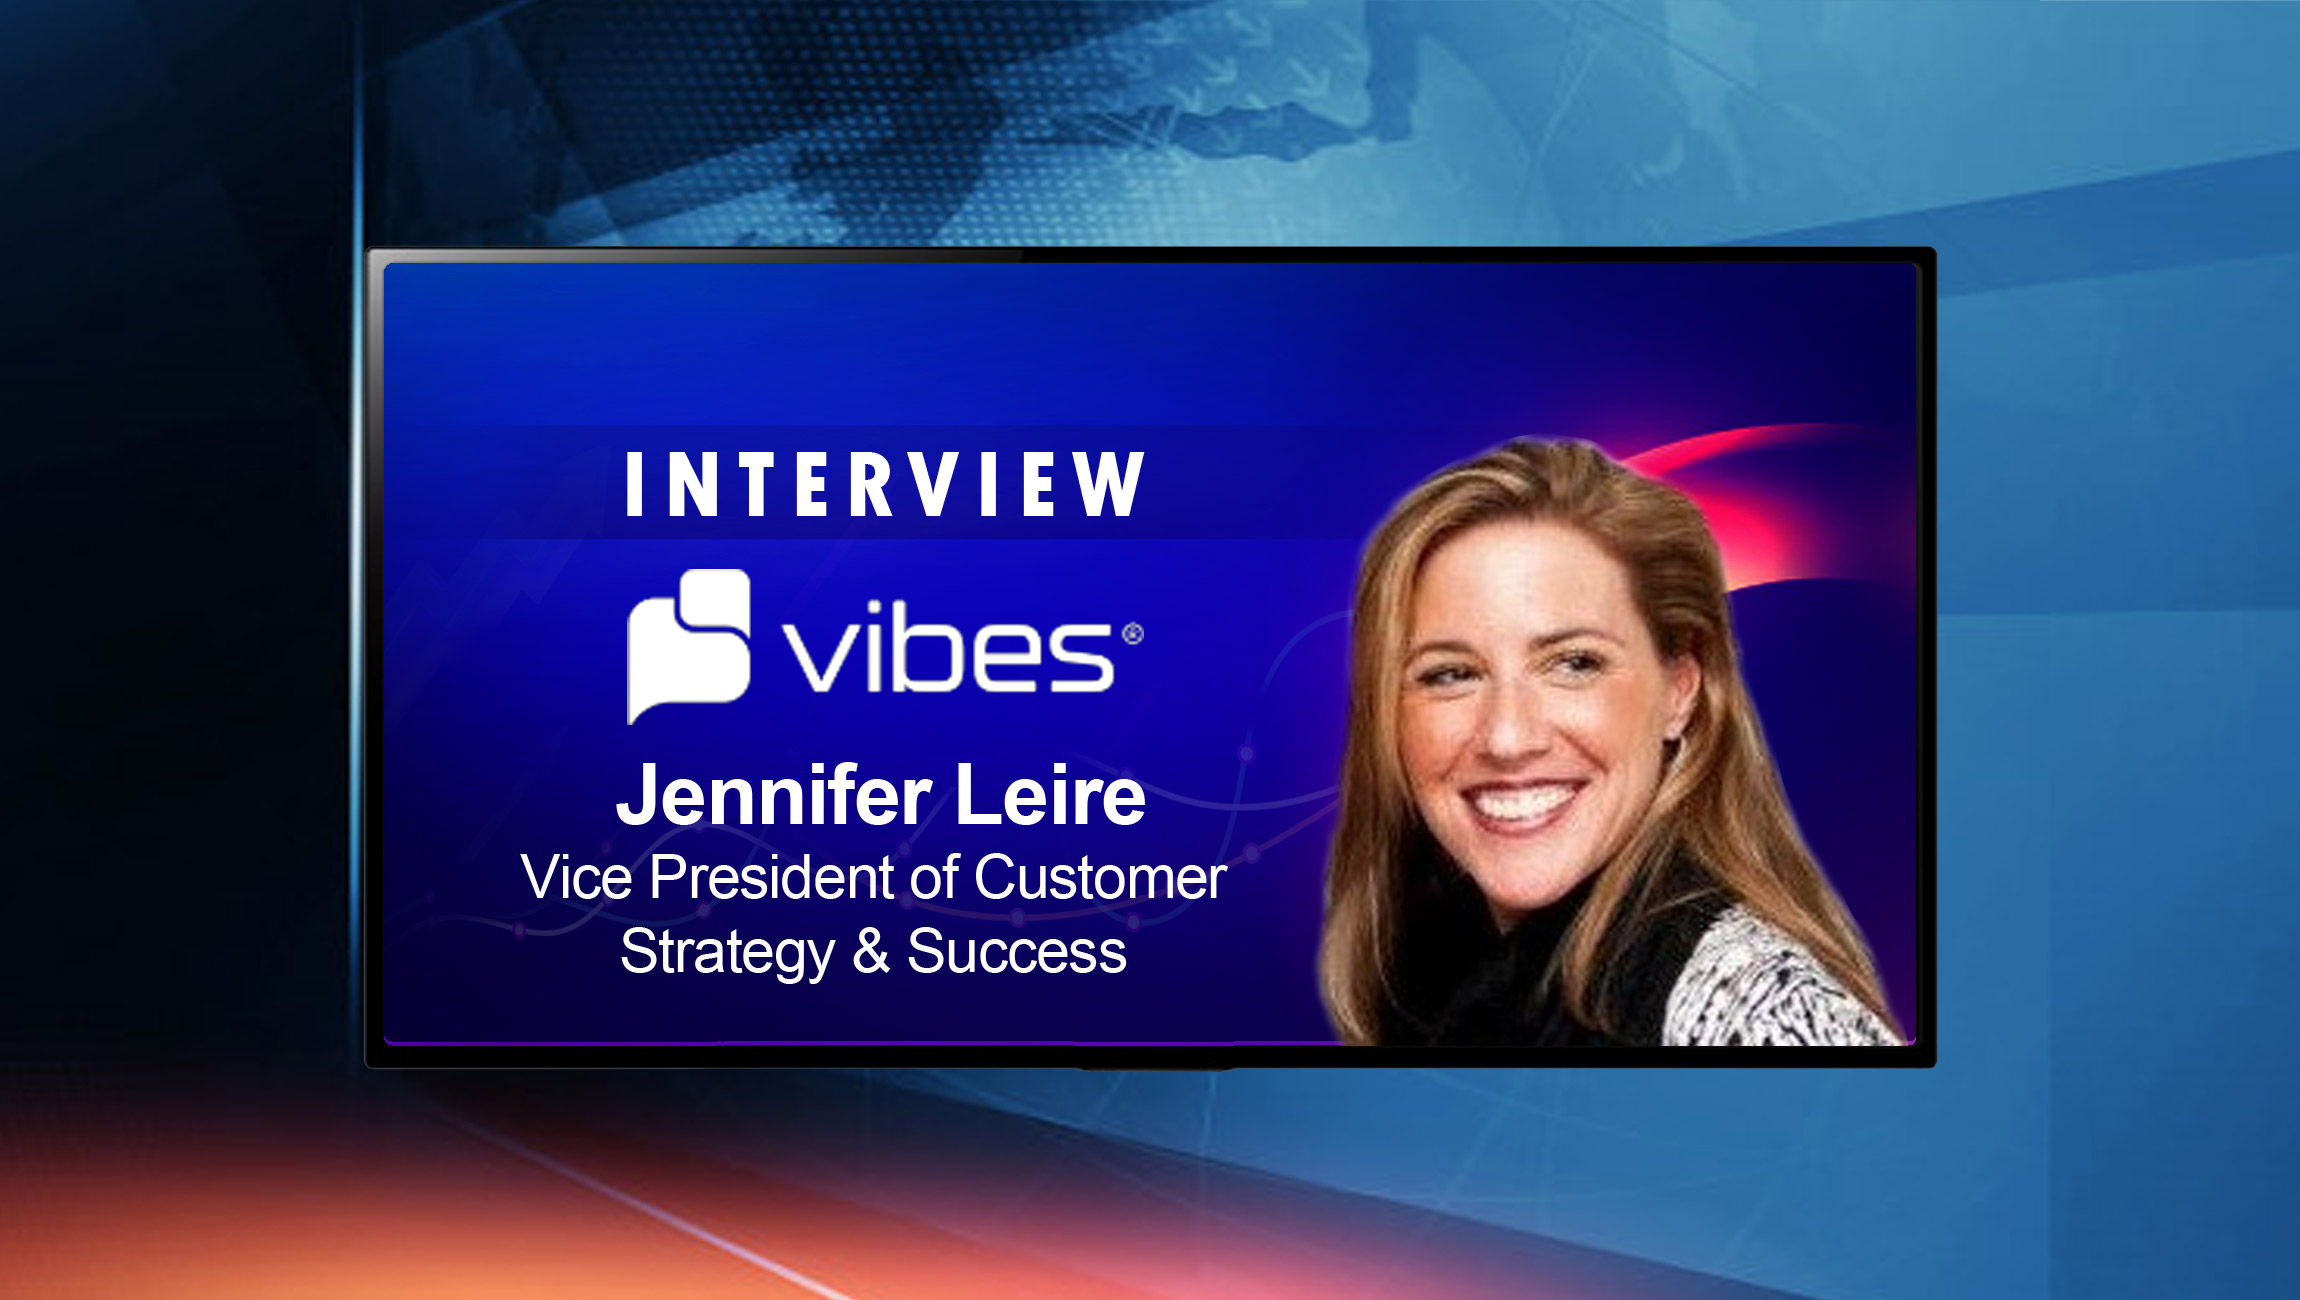 SalesTechStar Interview with Jennifer Leire, Vice President of Customer Strategy & Success at Vibes